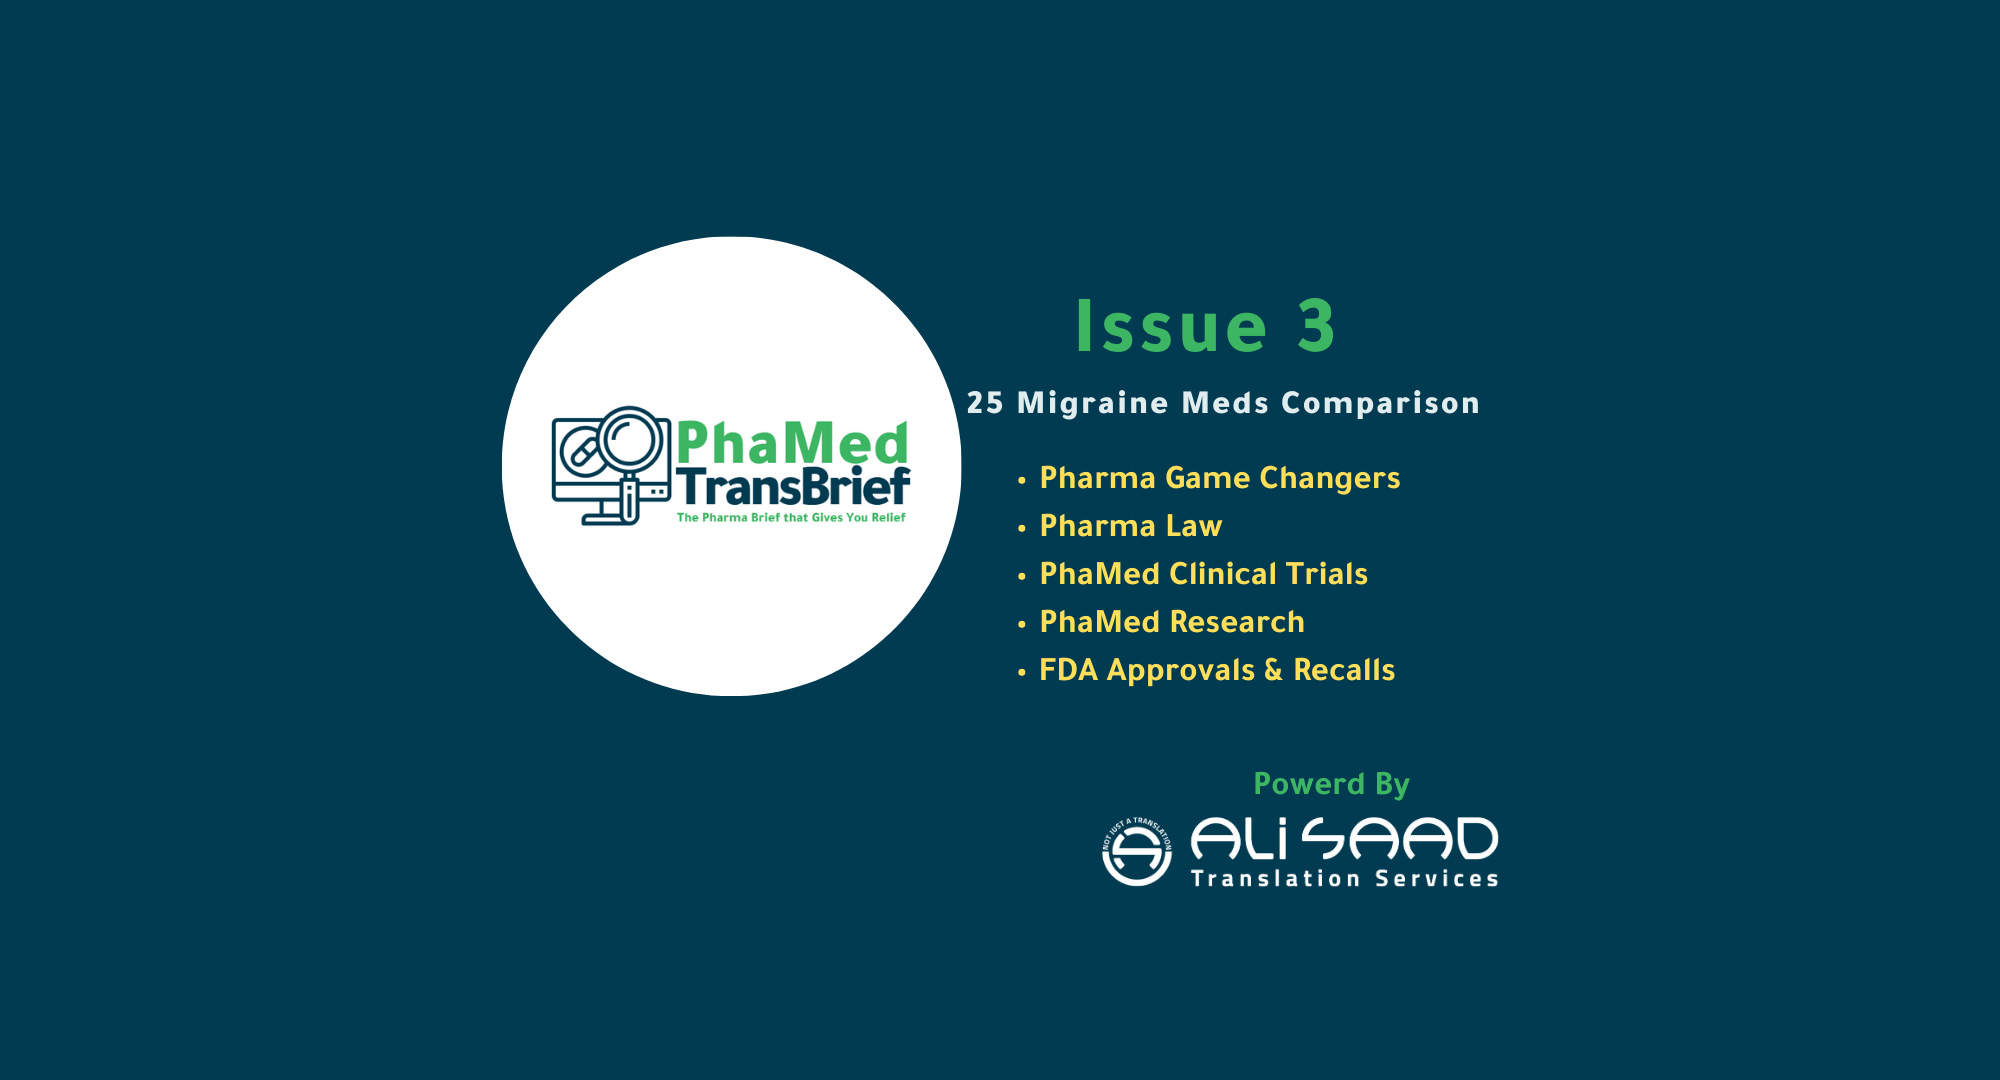 The feature image of the PhaMed Issue 3 by Ali Saad Arabic Translation Services